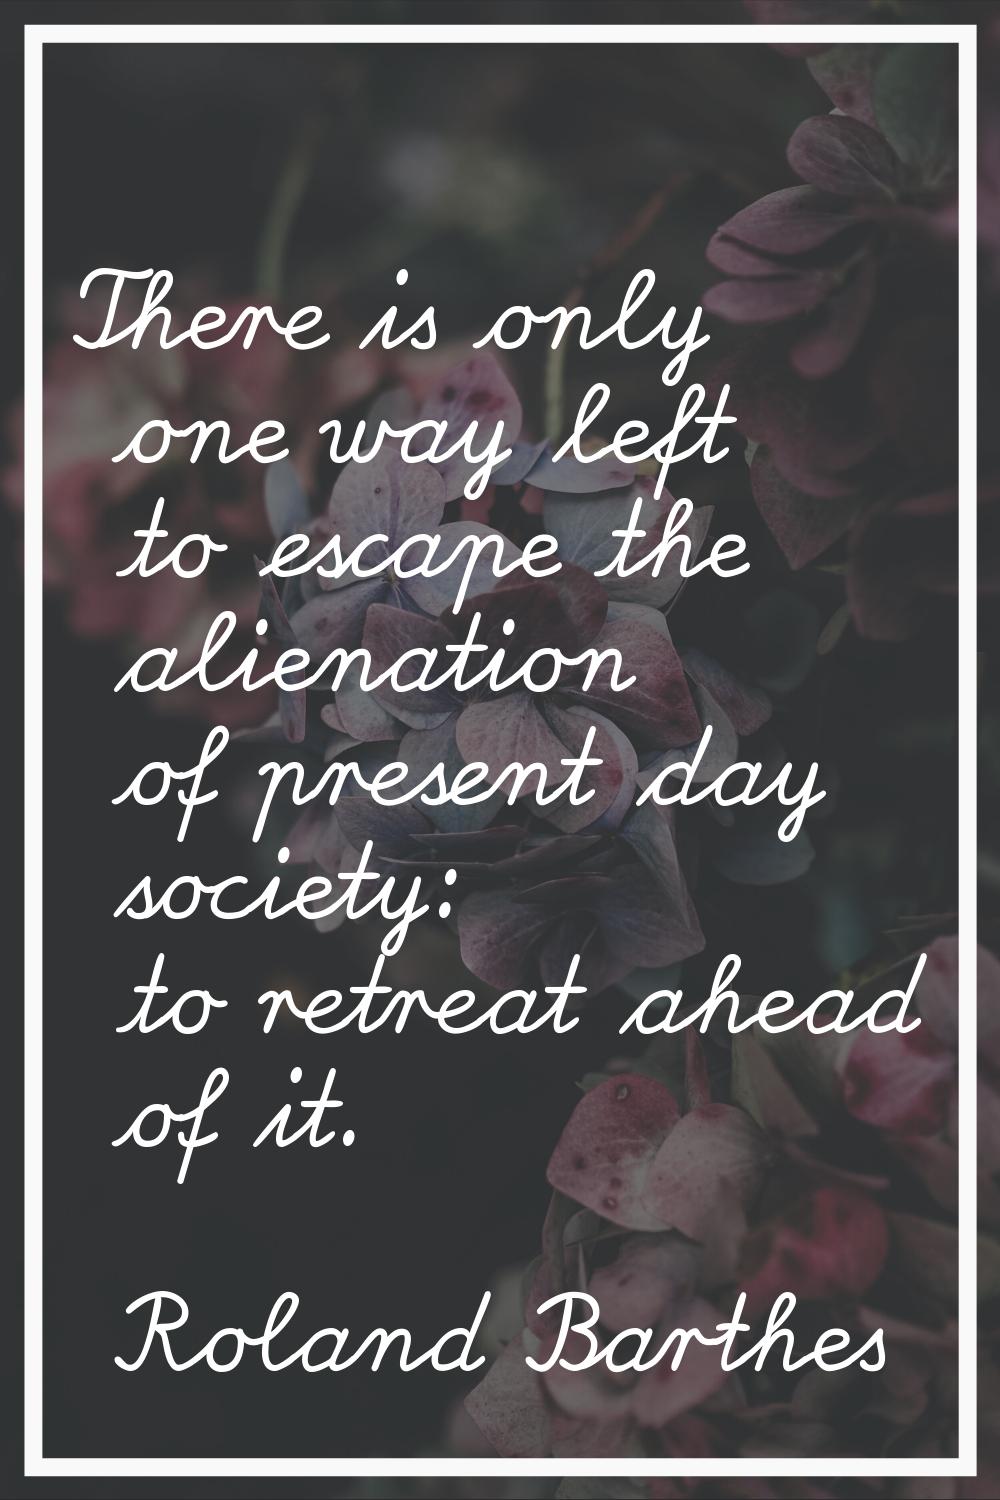 There is only one way left to escape the alienation of present day society: to retreat ahead of it.